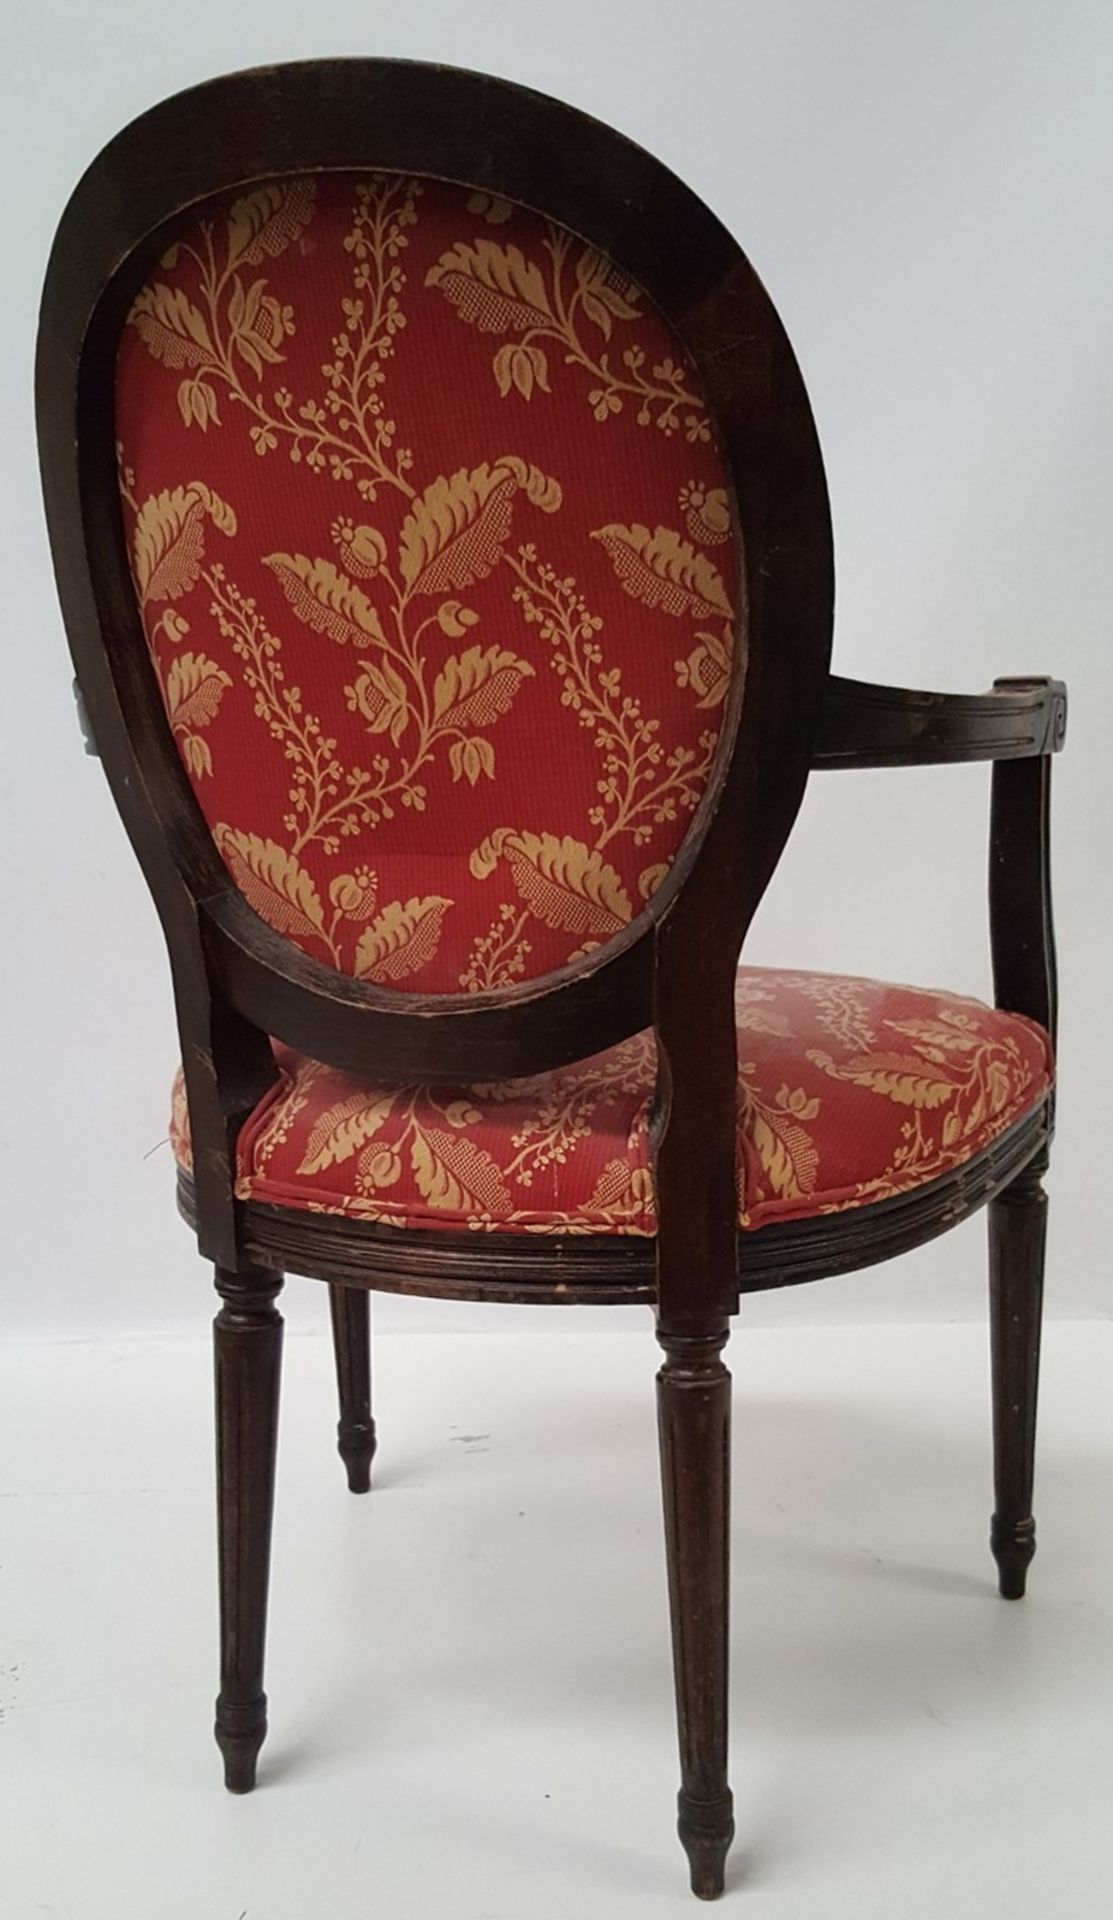 6 x Antique Style Wooden Chairs Upholstered In Red Fabric With Gold Leaf Design - CL431 - Image 4 of 8